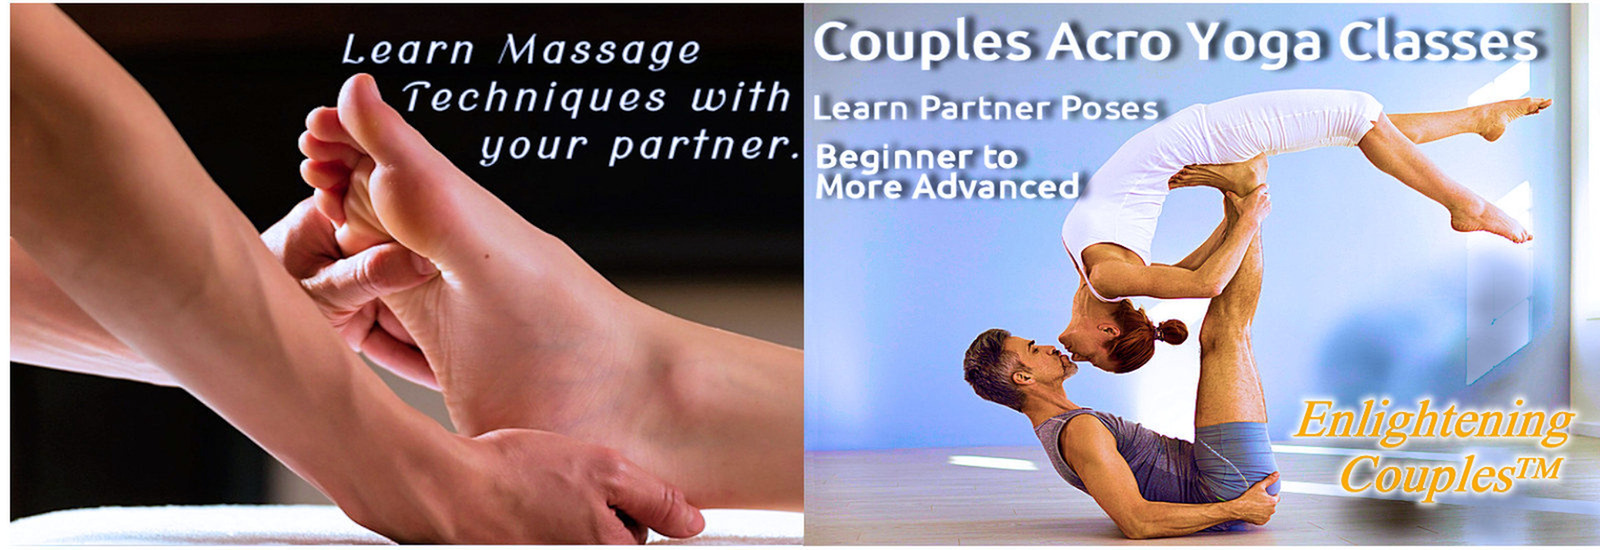 Learning Couples AcroYoga and Partner Massage